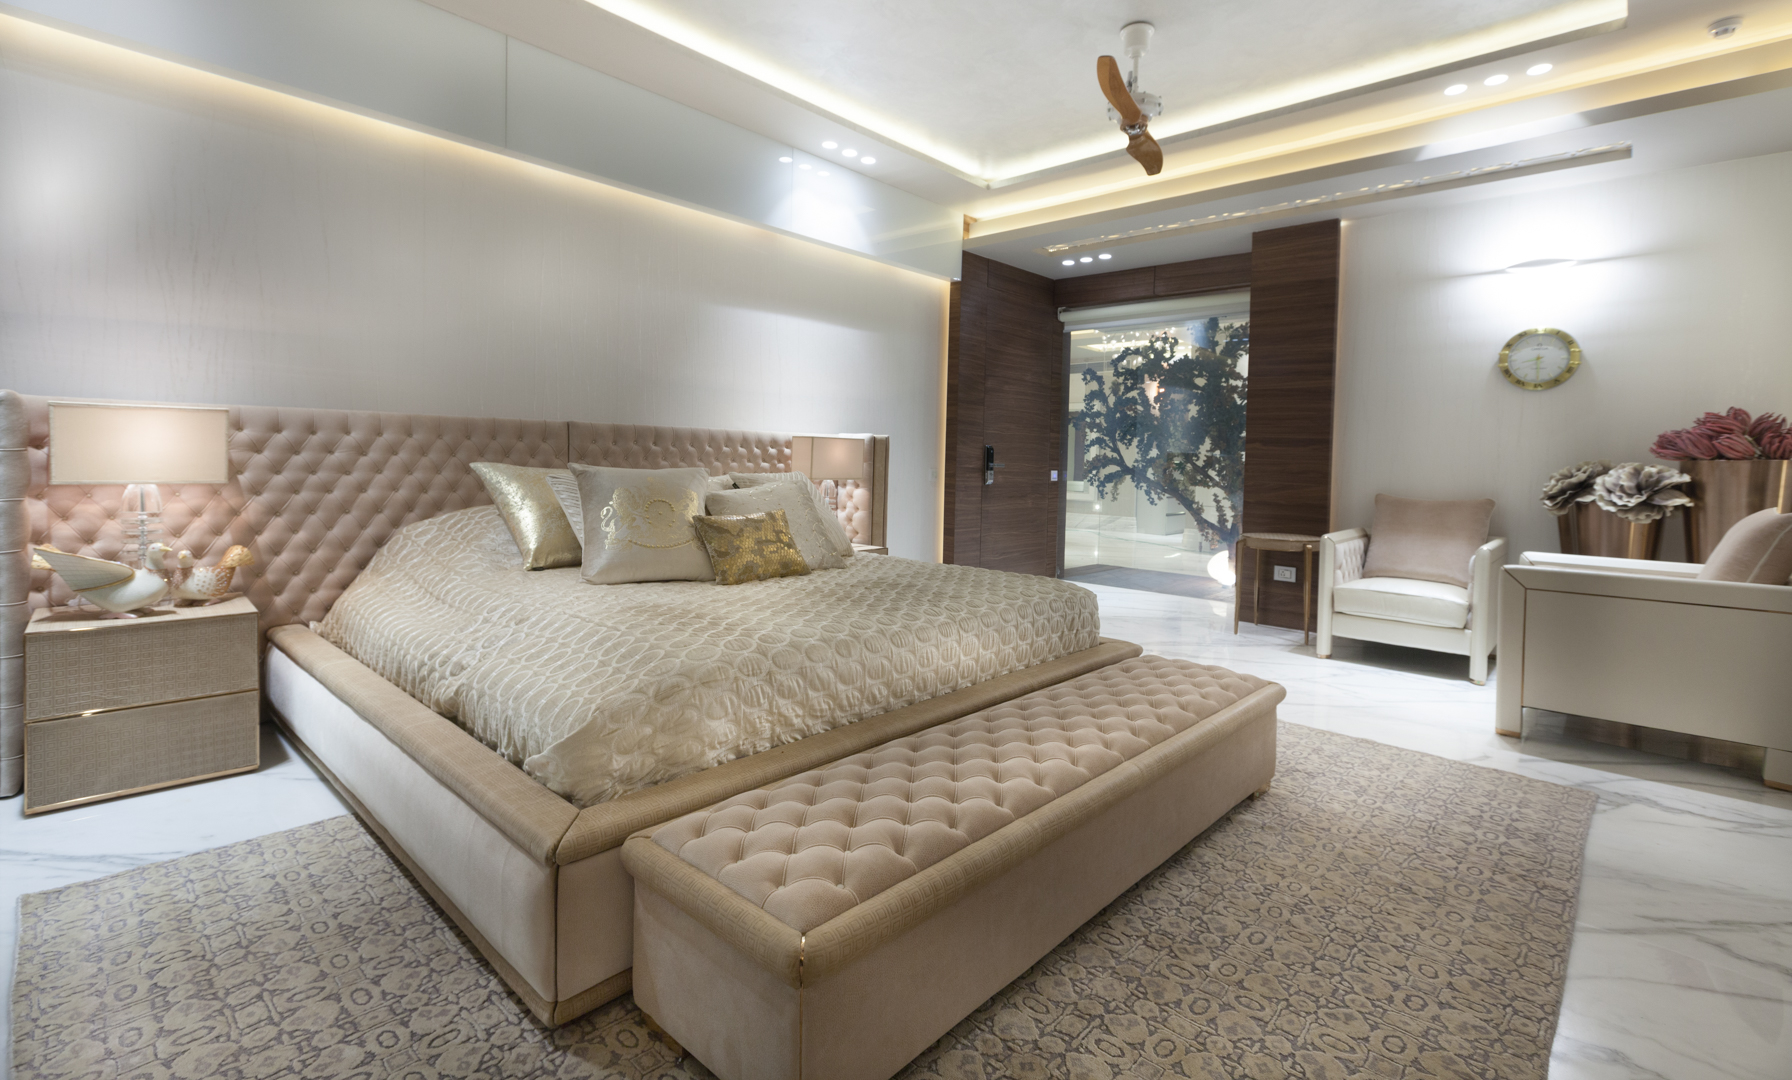 A Beautiful Bed Room Design by Essentia Environments